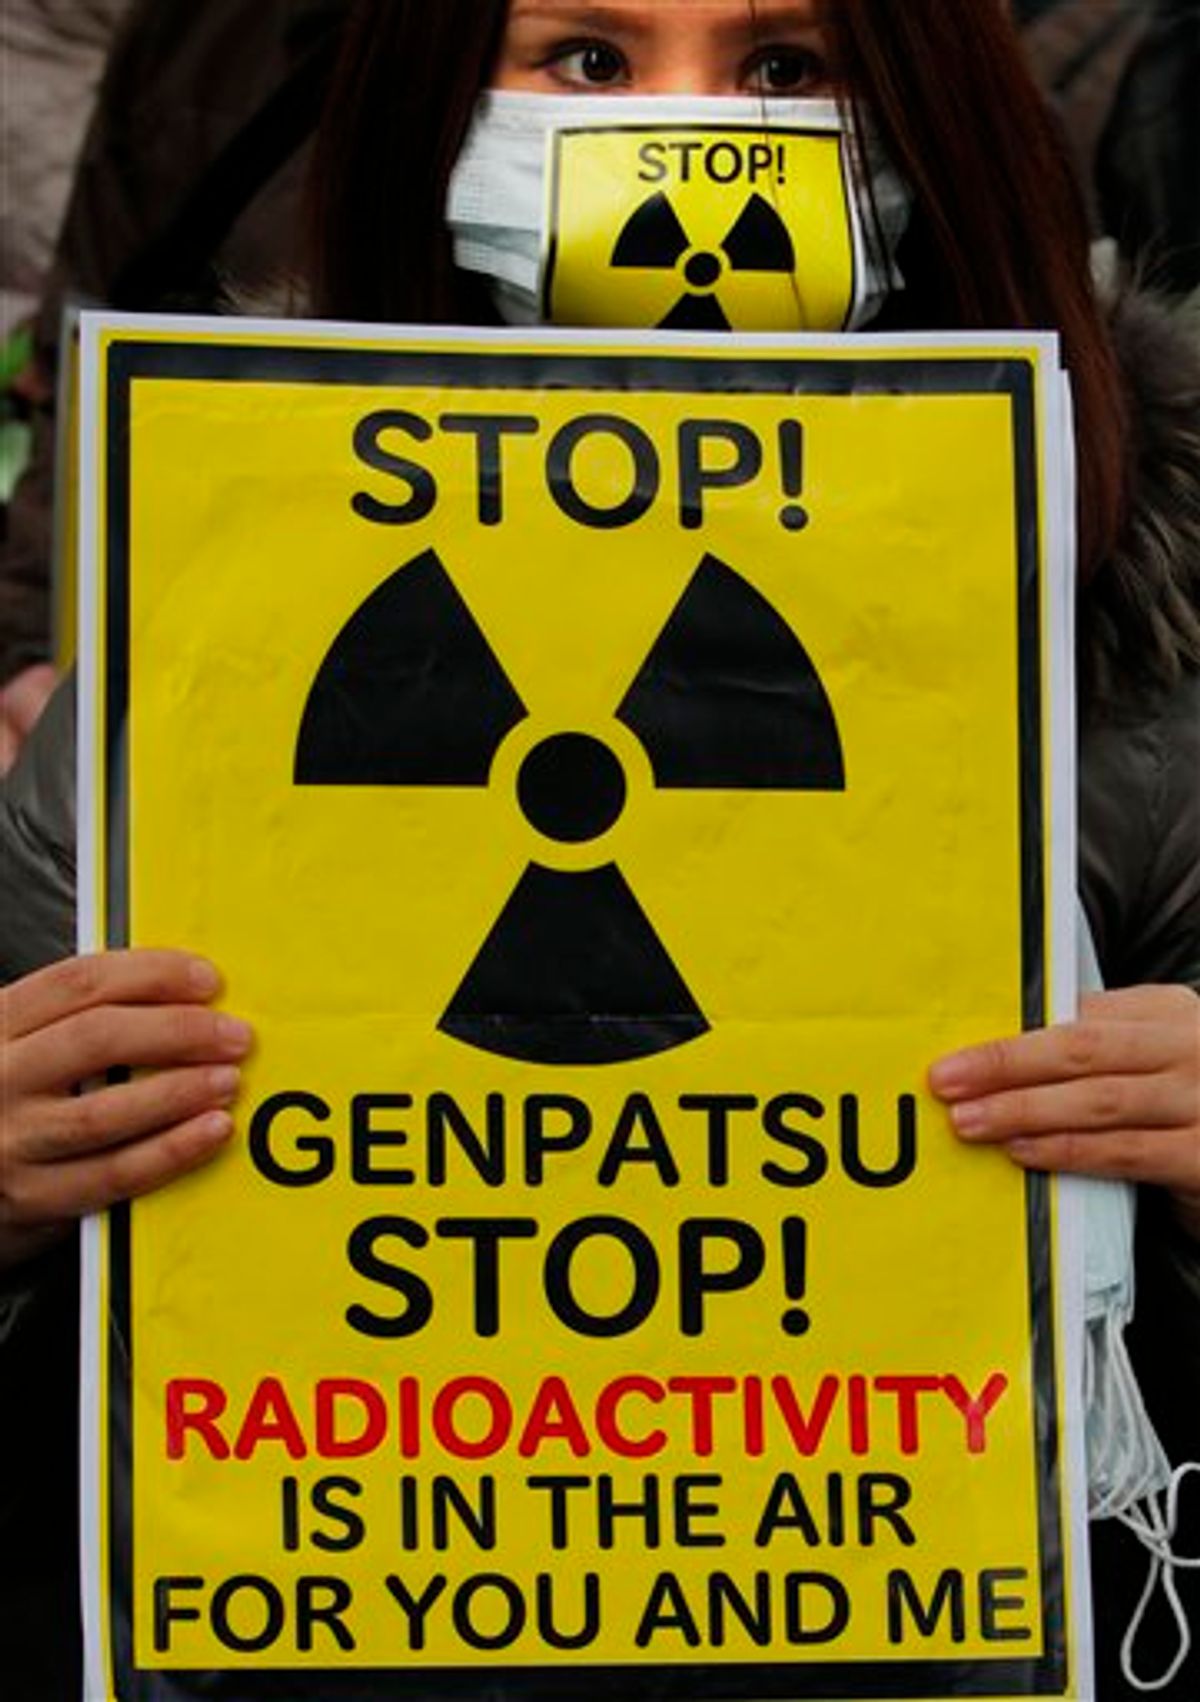 A protester holds a placard during an antinuclear rally in Tokyo Sunday, March 27, 2011. Leaked water in Unit 2 of the Fukushima Dai-ichi plant measured 10 million times higher than usual radioactivity levels when the reactor is operating normally, Tokyo Electric Power Co. spokesman Takashi Kurita told reporters in Tokyo. "Genpatsu" on the sign means "nuclear power plant." (AP Photo/Itsuo Inouye) (AP)